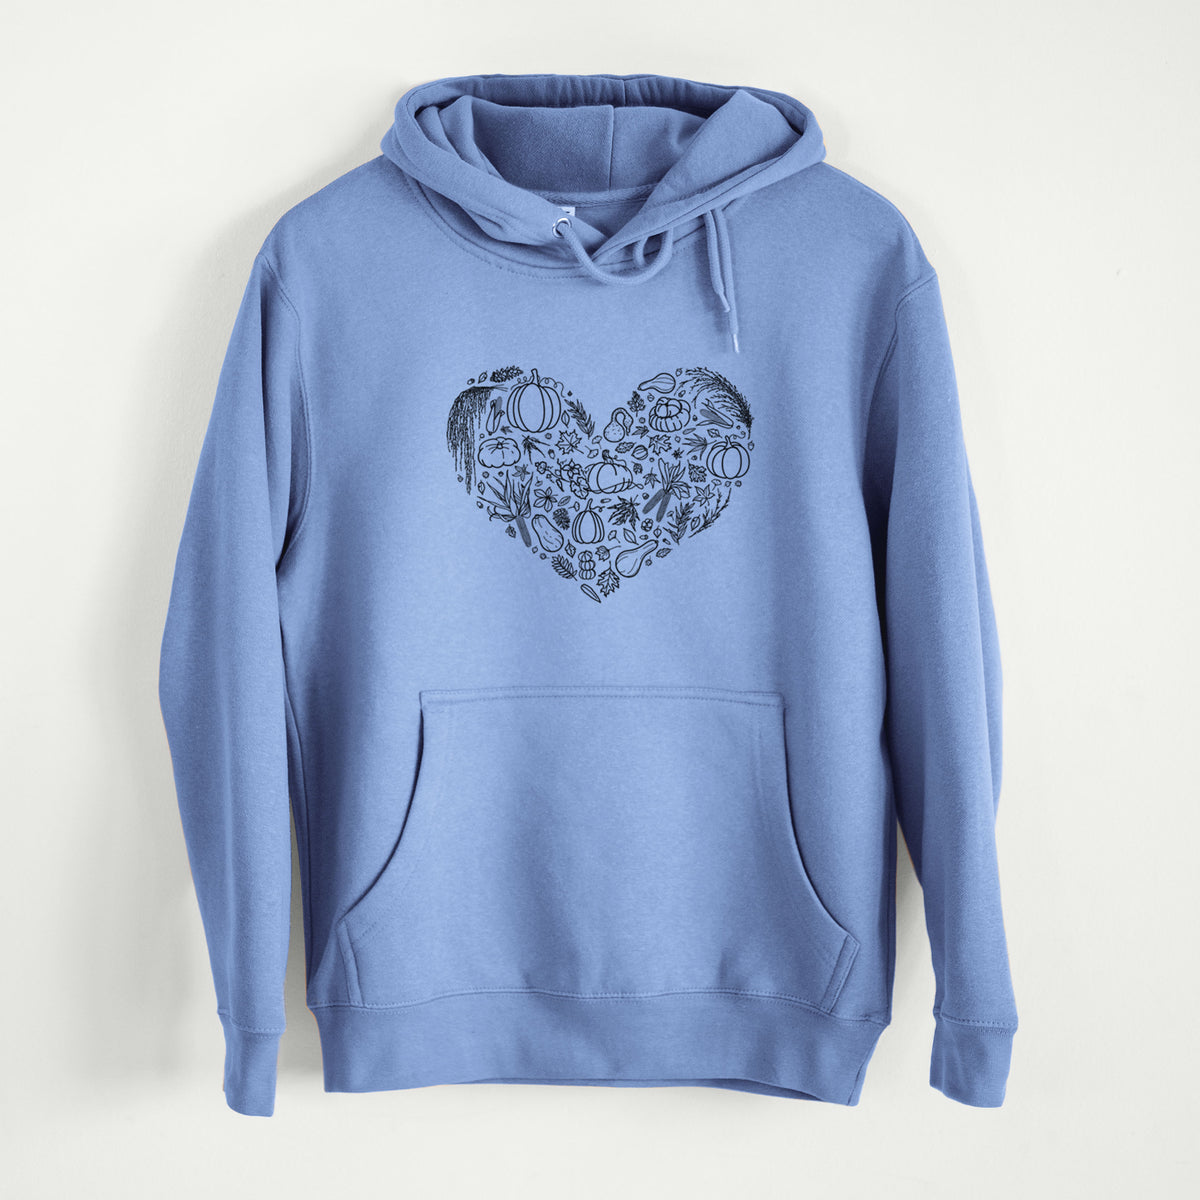 Heart Full of Fall  - Mid-Weight Unisex Premium Blend Hoodie